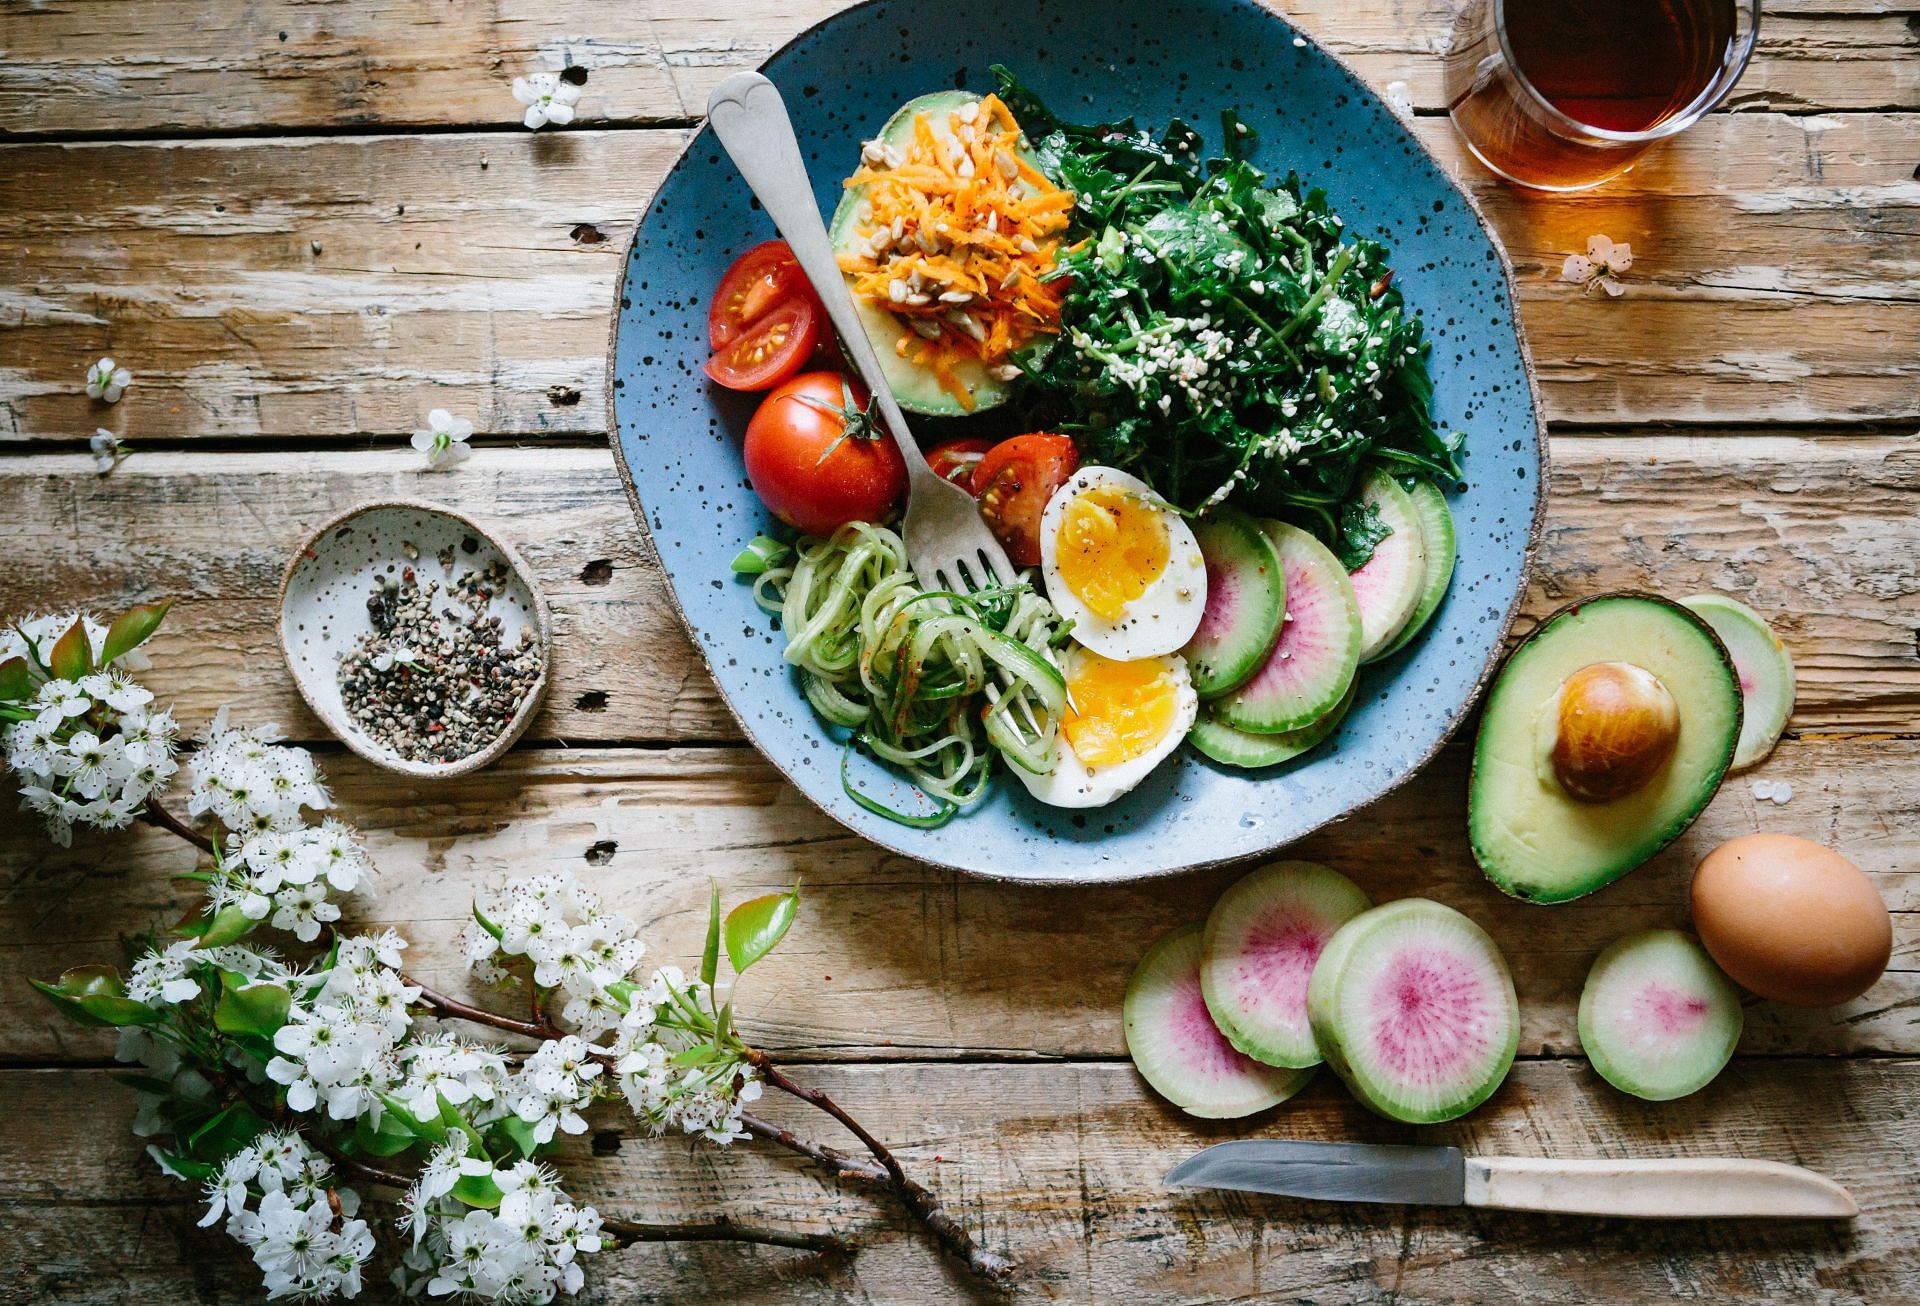 Low-carb diet can help people lose weight and manage their blood sugar levels. (Image via Unsplash/Brooke Lark)